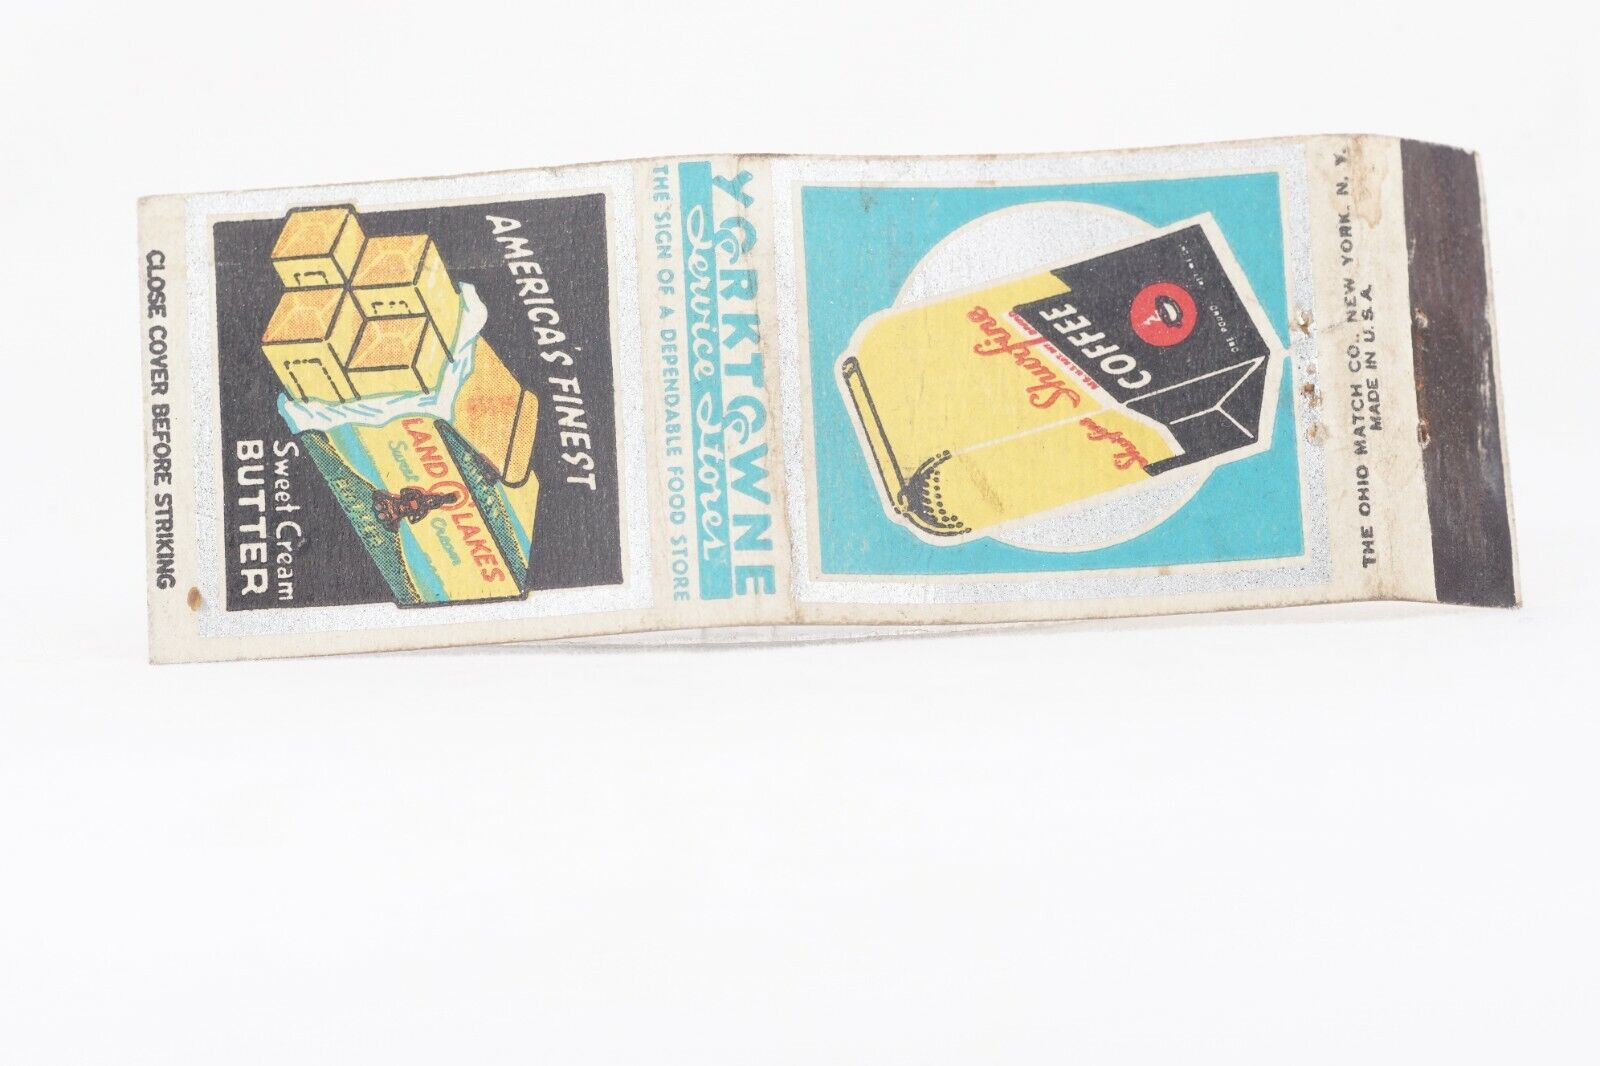 Land O Lakes Butter Historic Matchbook Advertising, Yorktown Service Stores